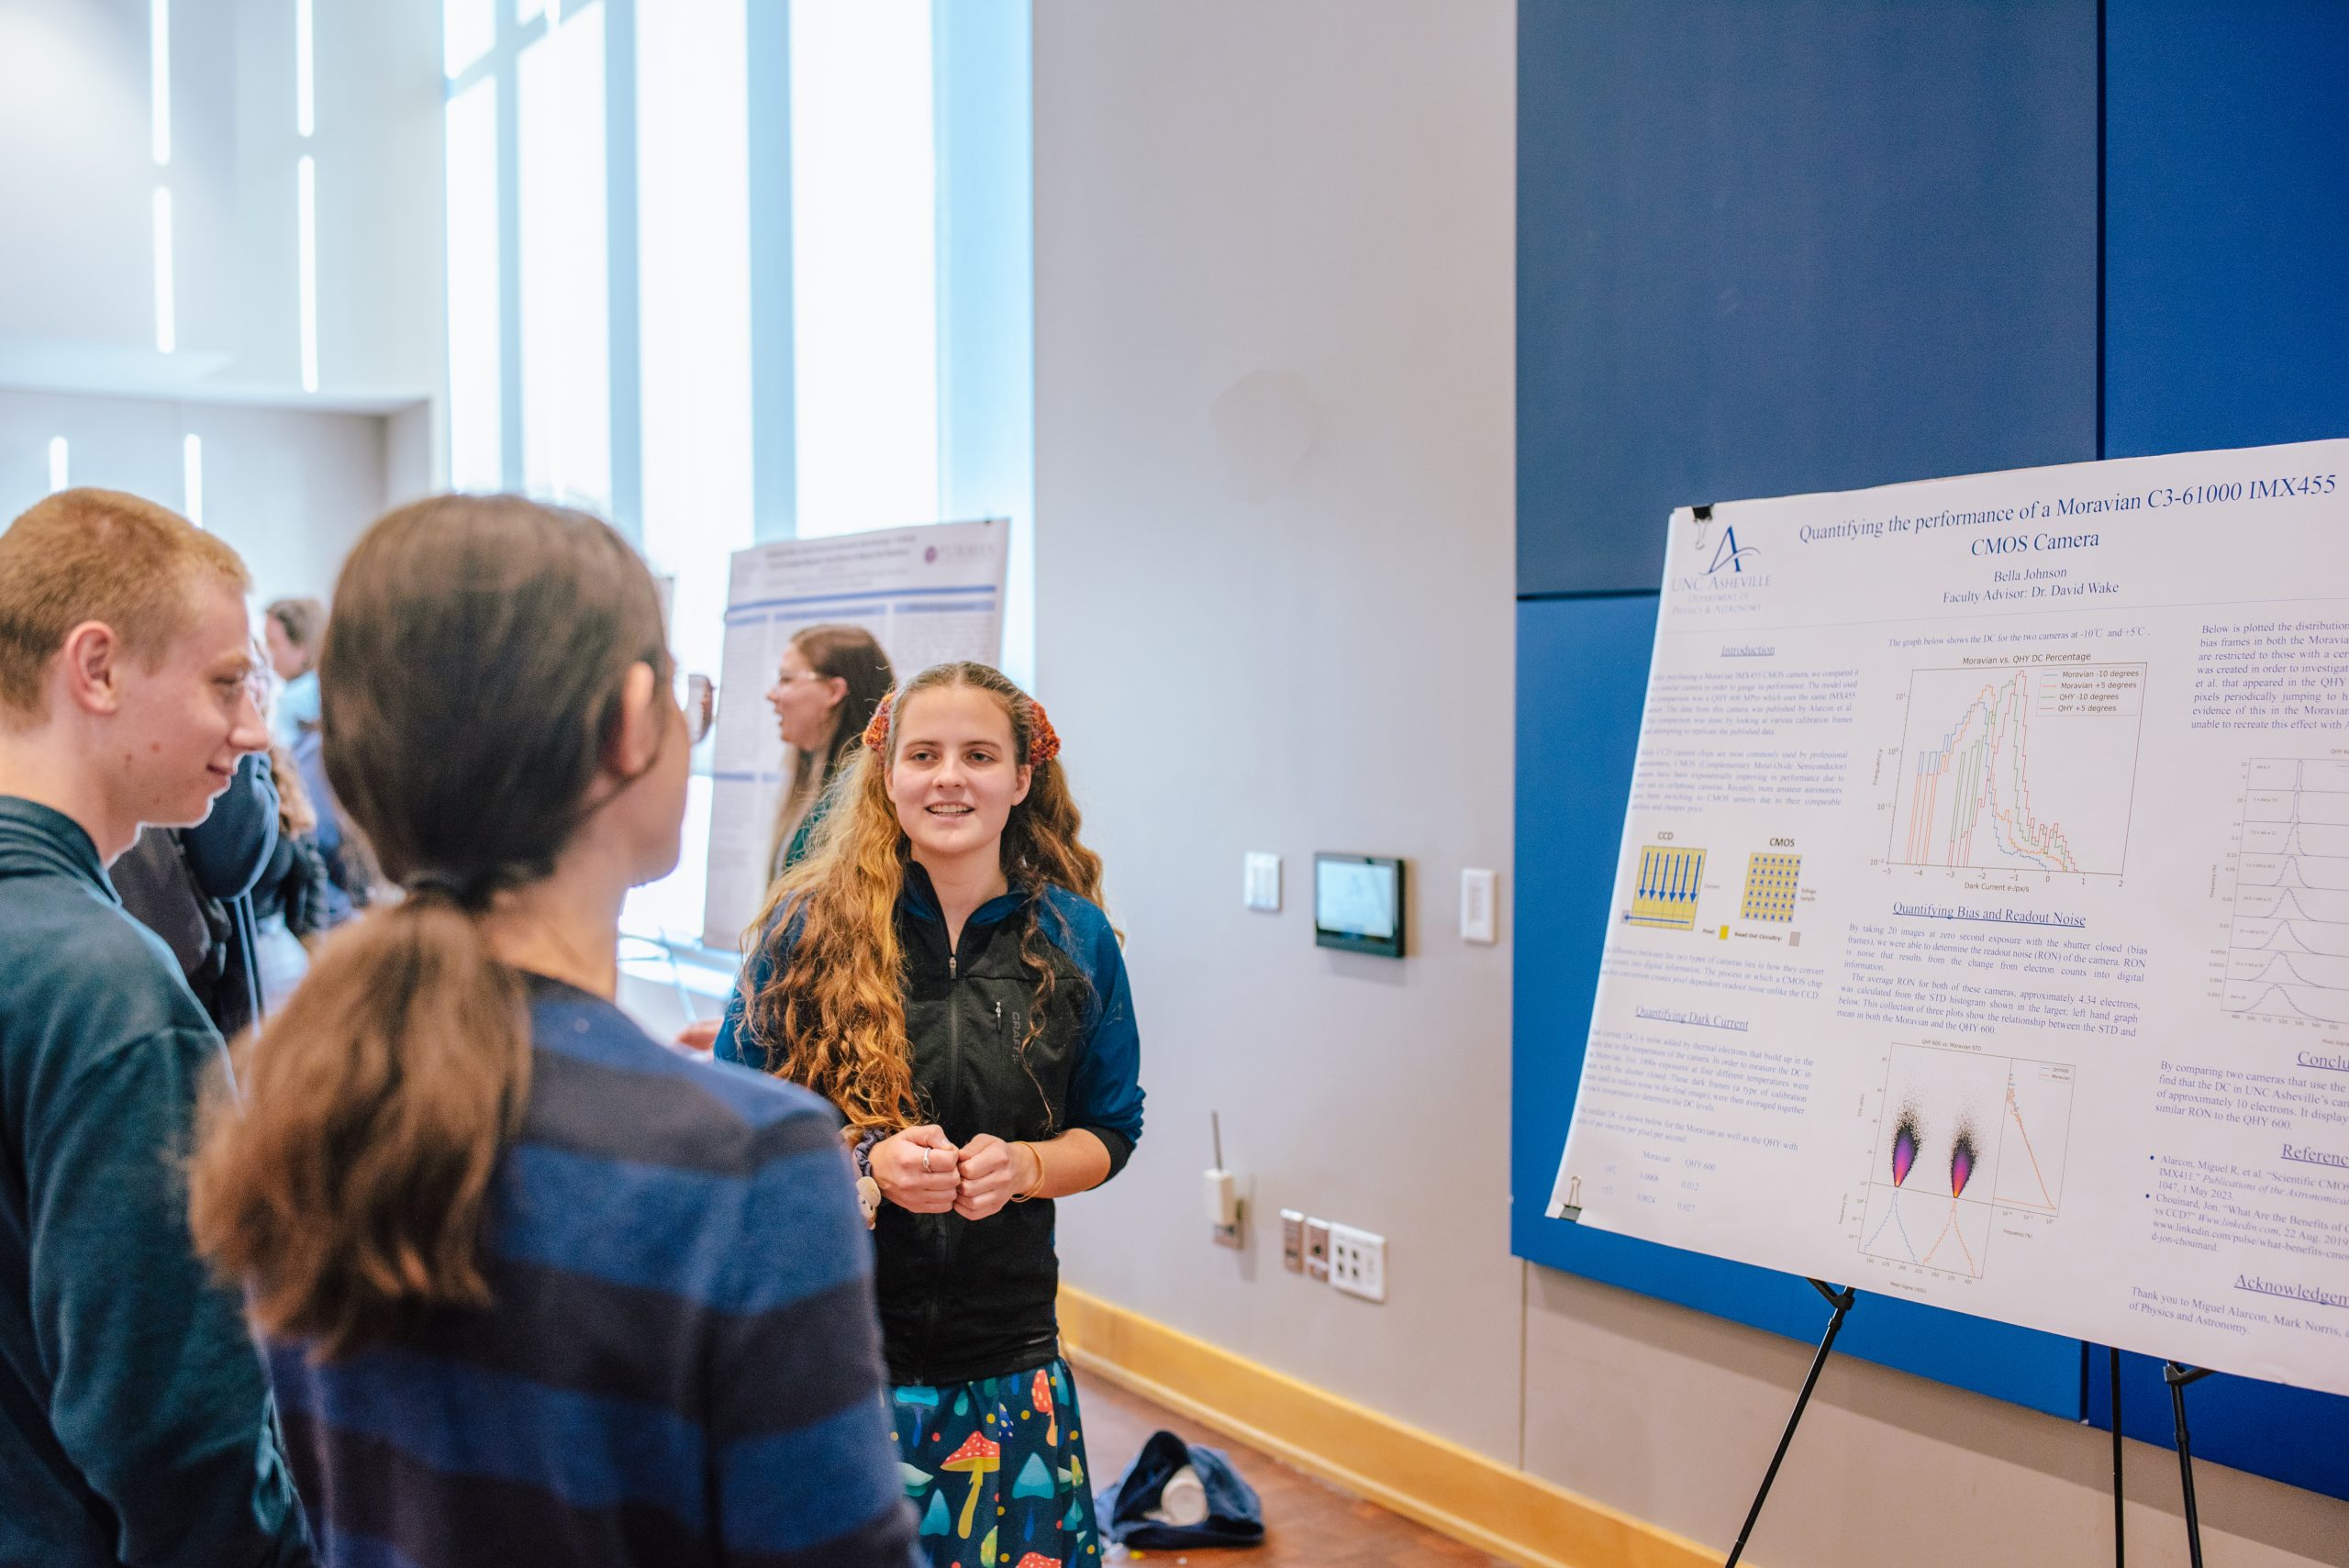 a student presenting her research project to a few onlookers